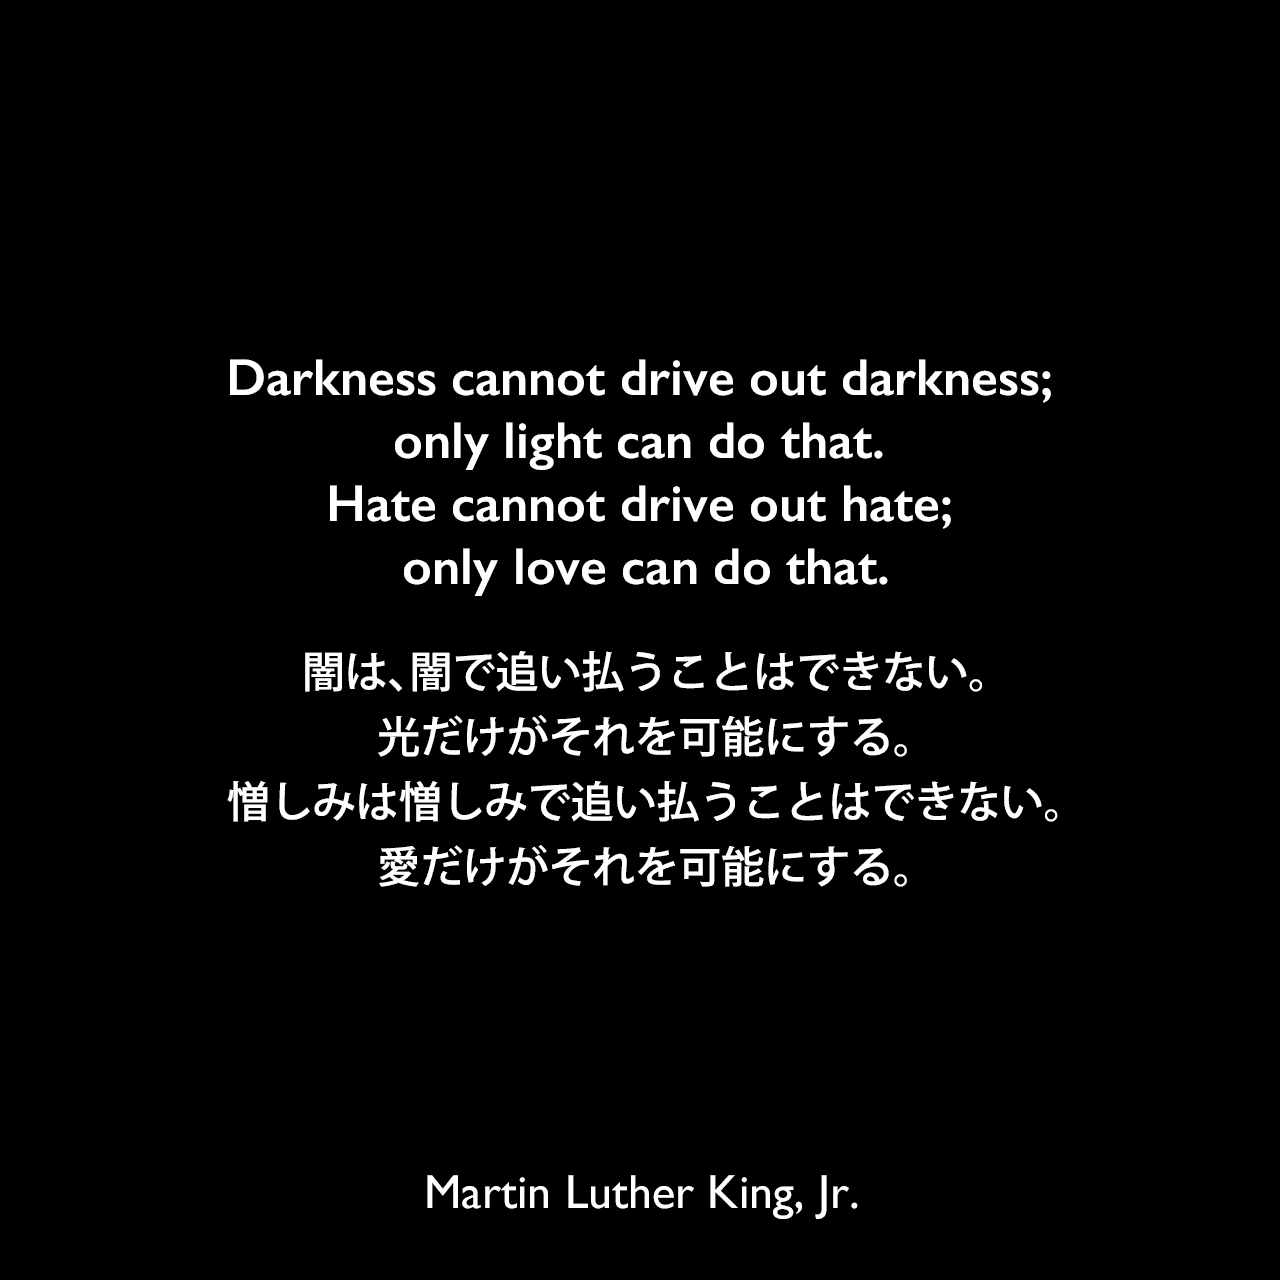 Darkness cannot drive out darkness; only light can do that. Hate cannot drive out hate; only love can do that.闇は、闇で追い払うことはできない。光だけがそれを可能にする。憎しみは憎しみで追い払うことはできない。愛だけがそれを可能にする。